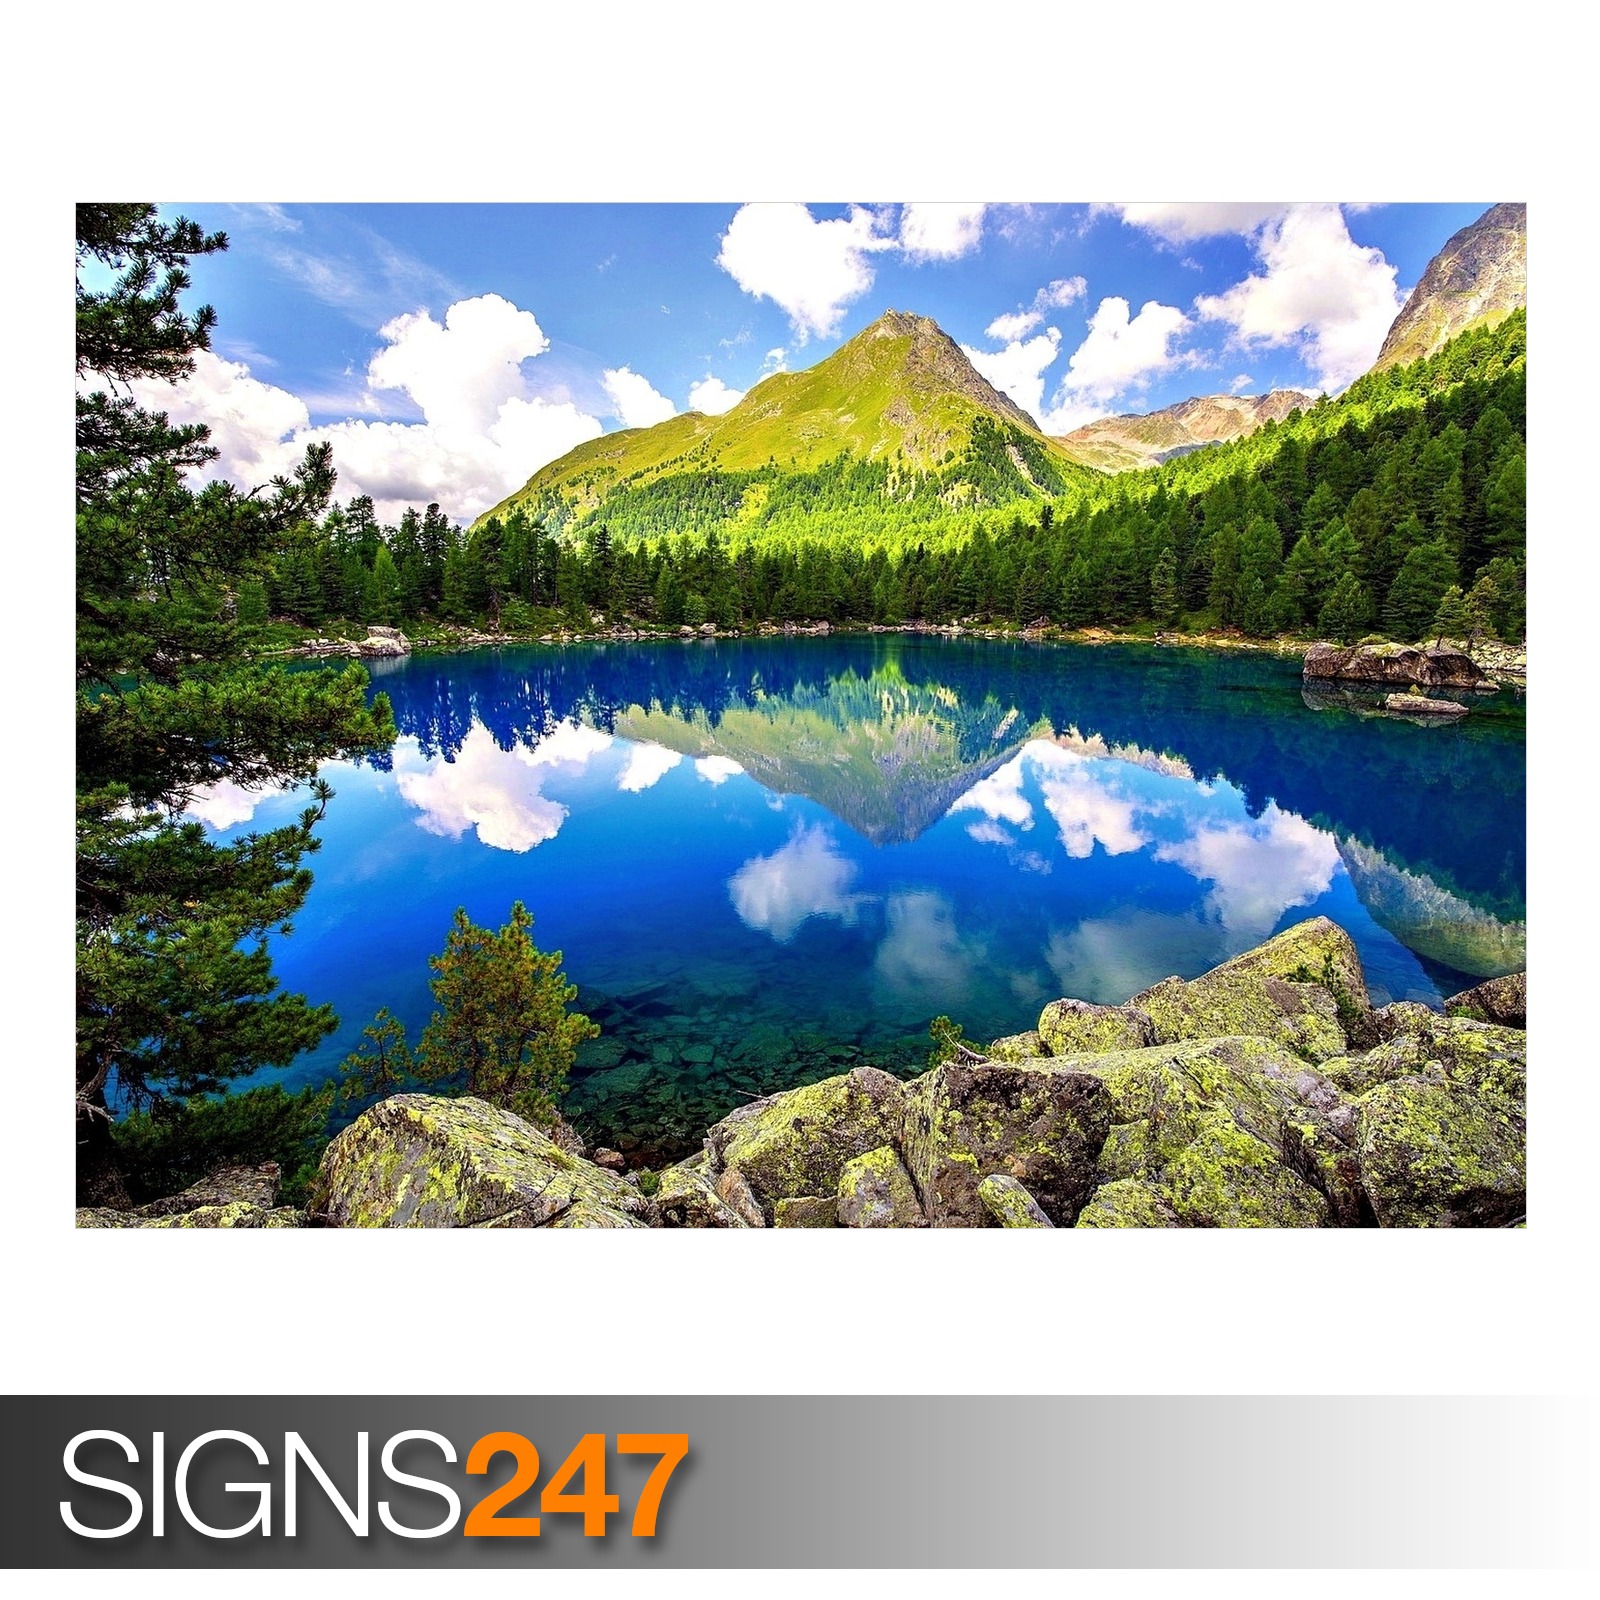 SPRING MOUNTAIN LANDSCAPE (AE010) NATURE POSTER - Poster Print Art A0 ...